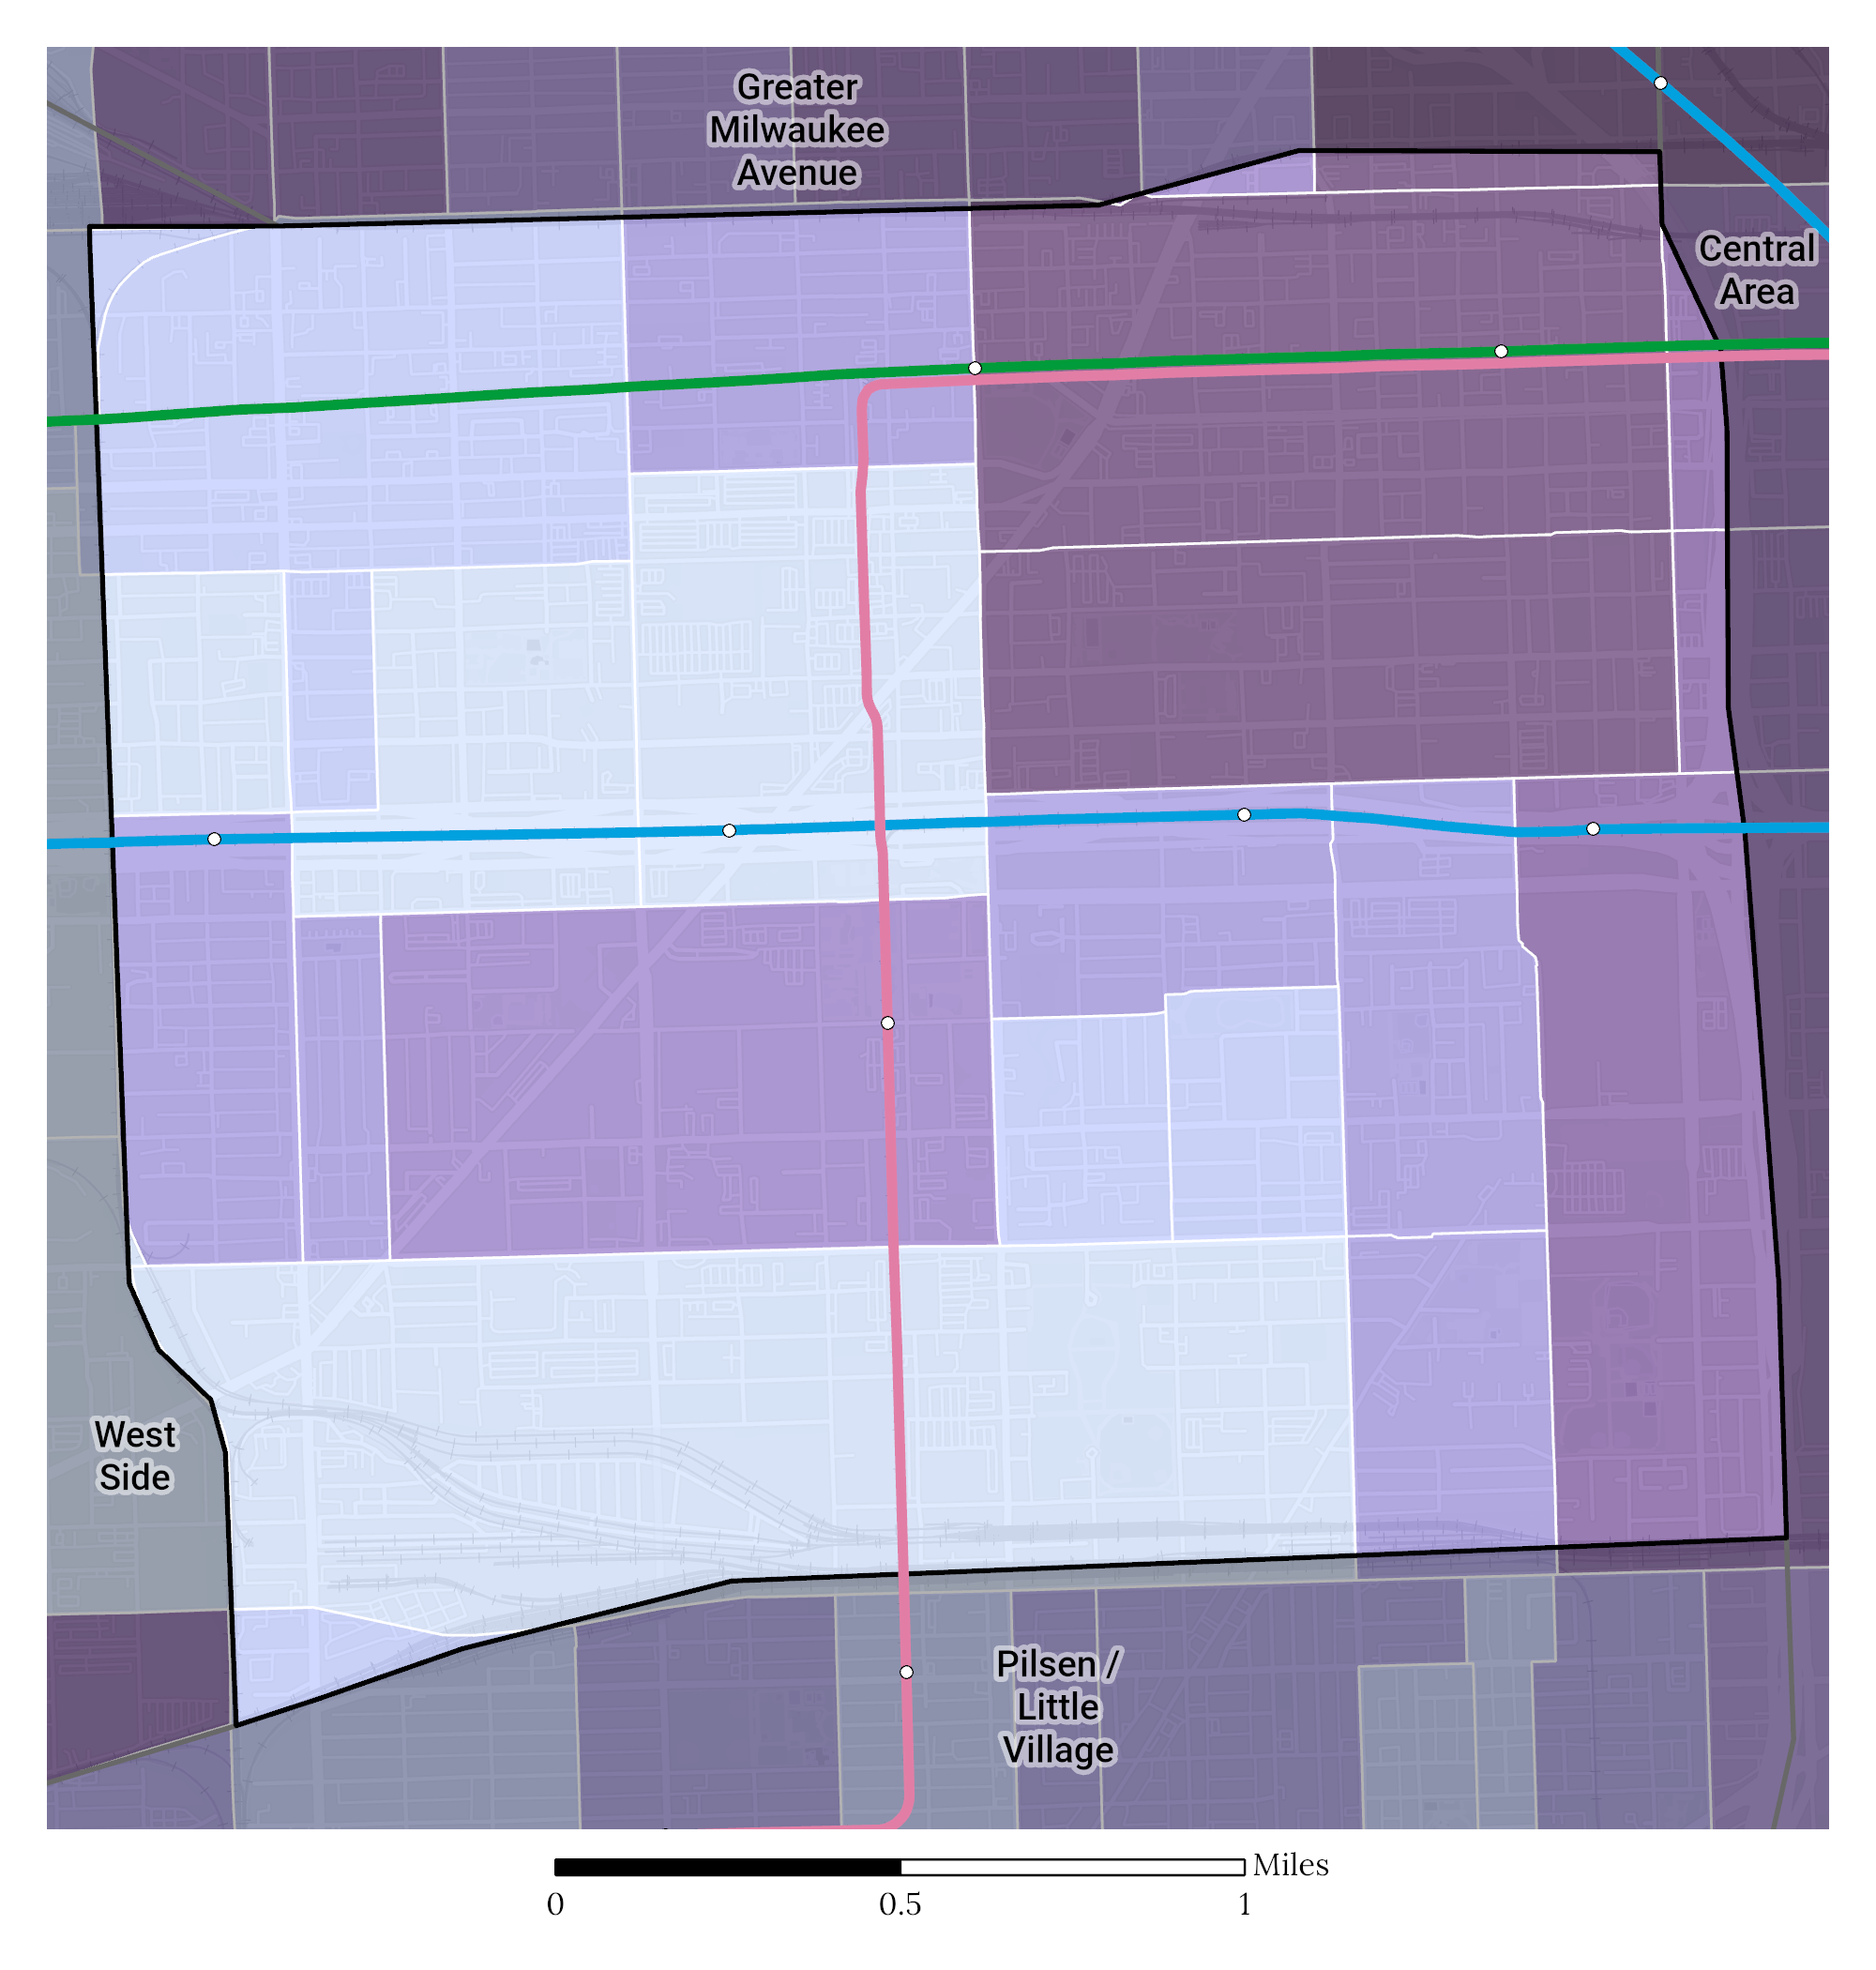 Median Household Income map Near West Side